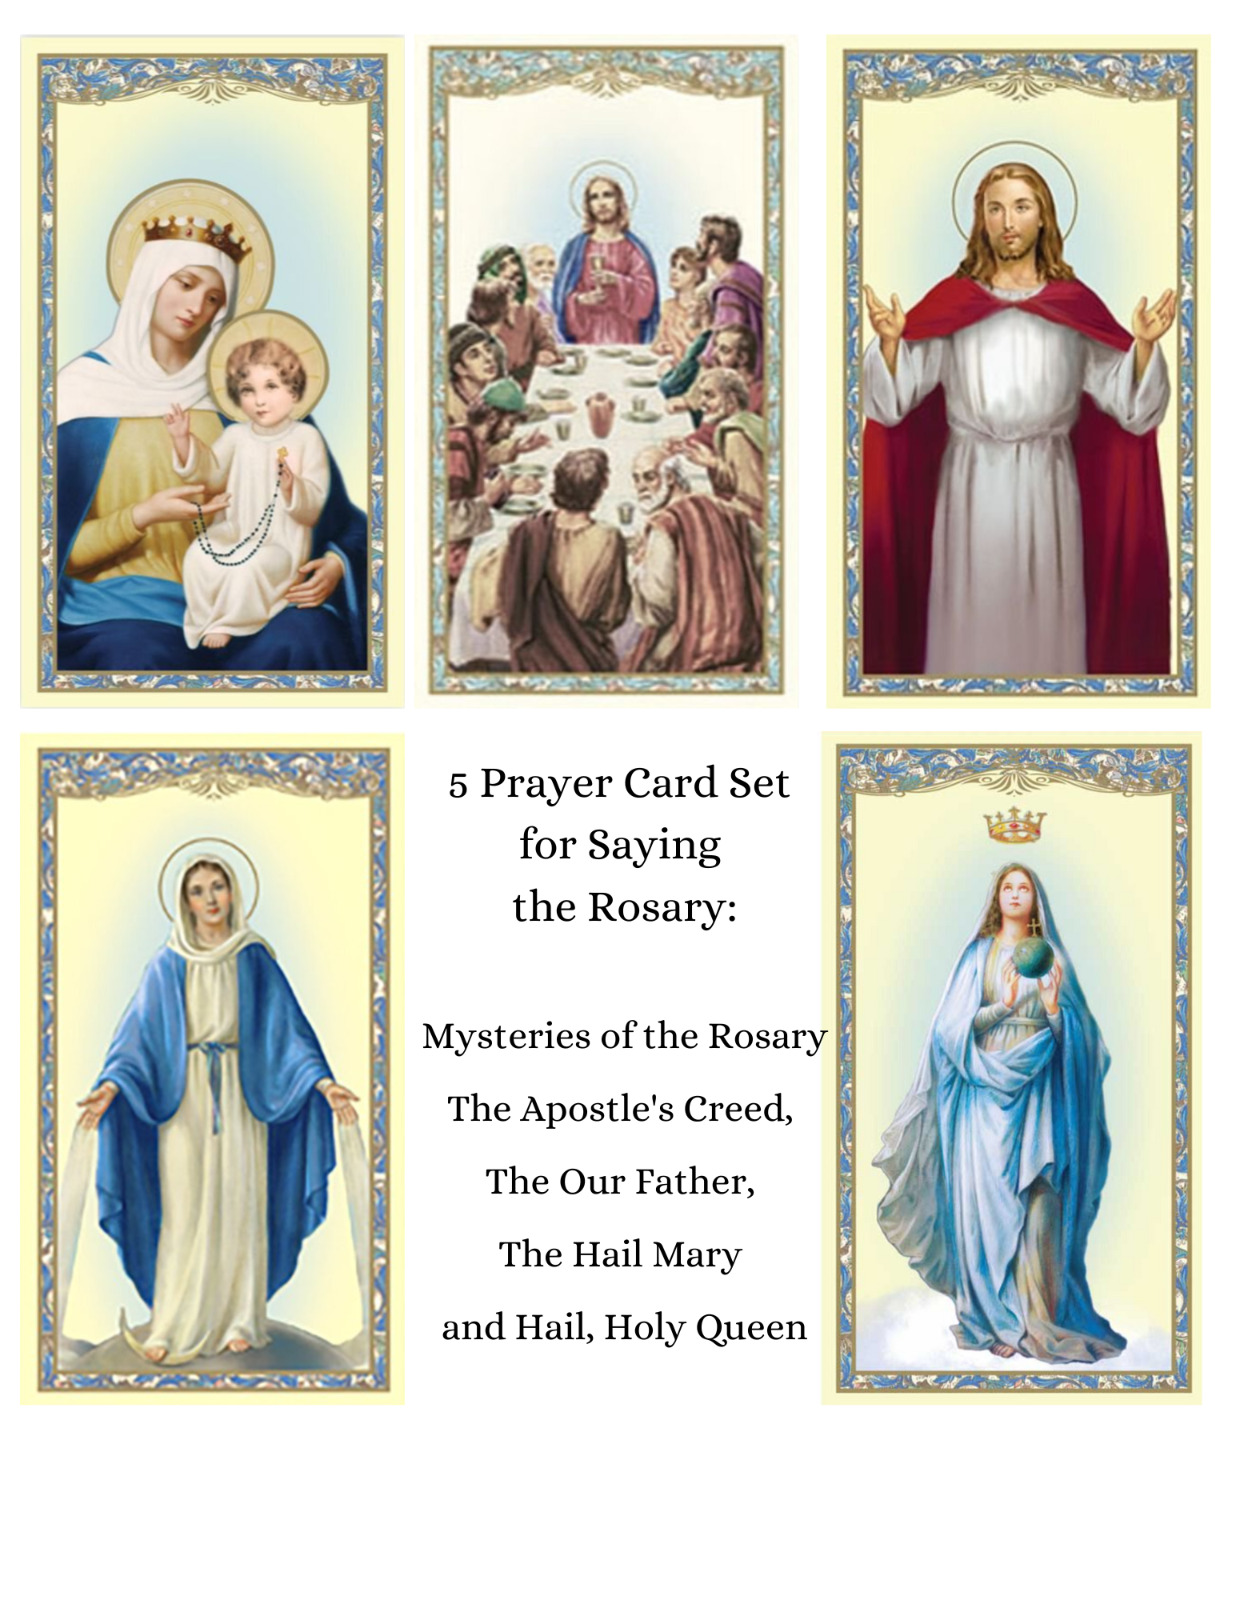 5 Prayer Card Lot for Saying Rosary Catholic Our Father Hail Mary Apostles Creed